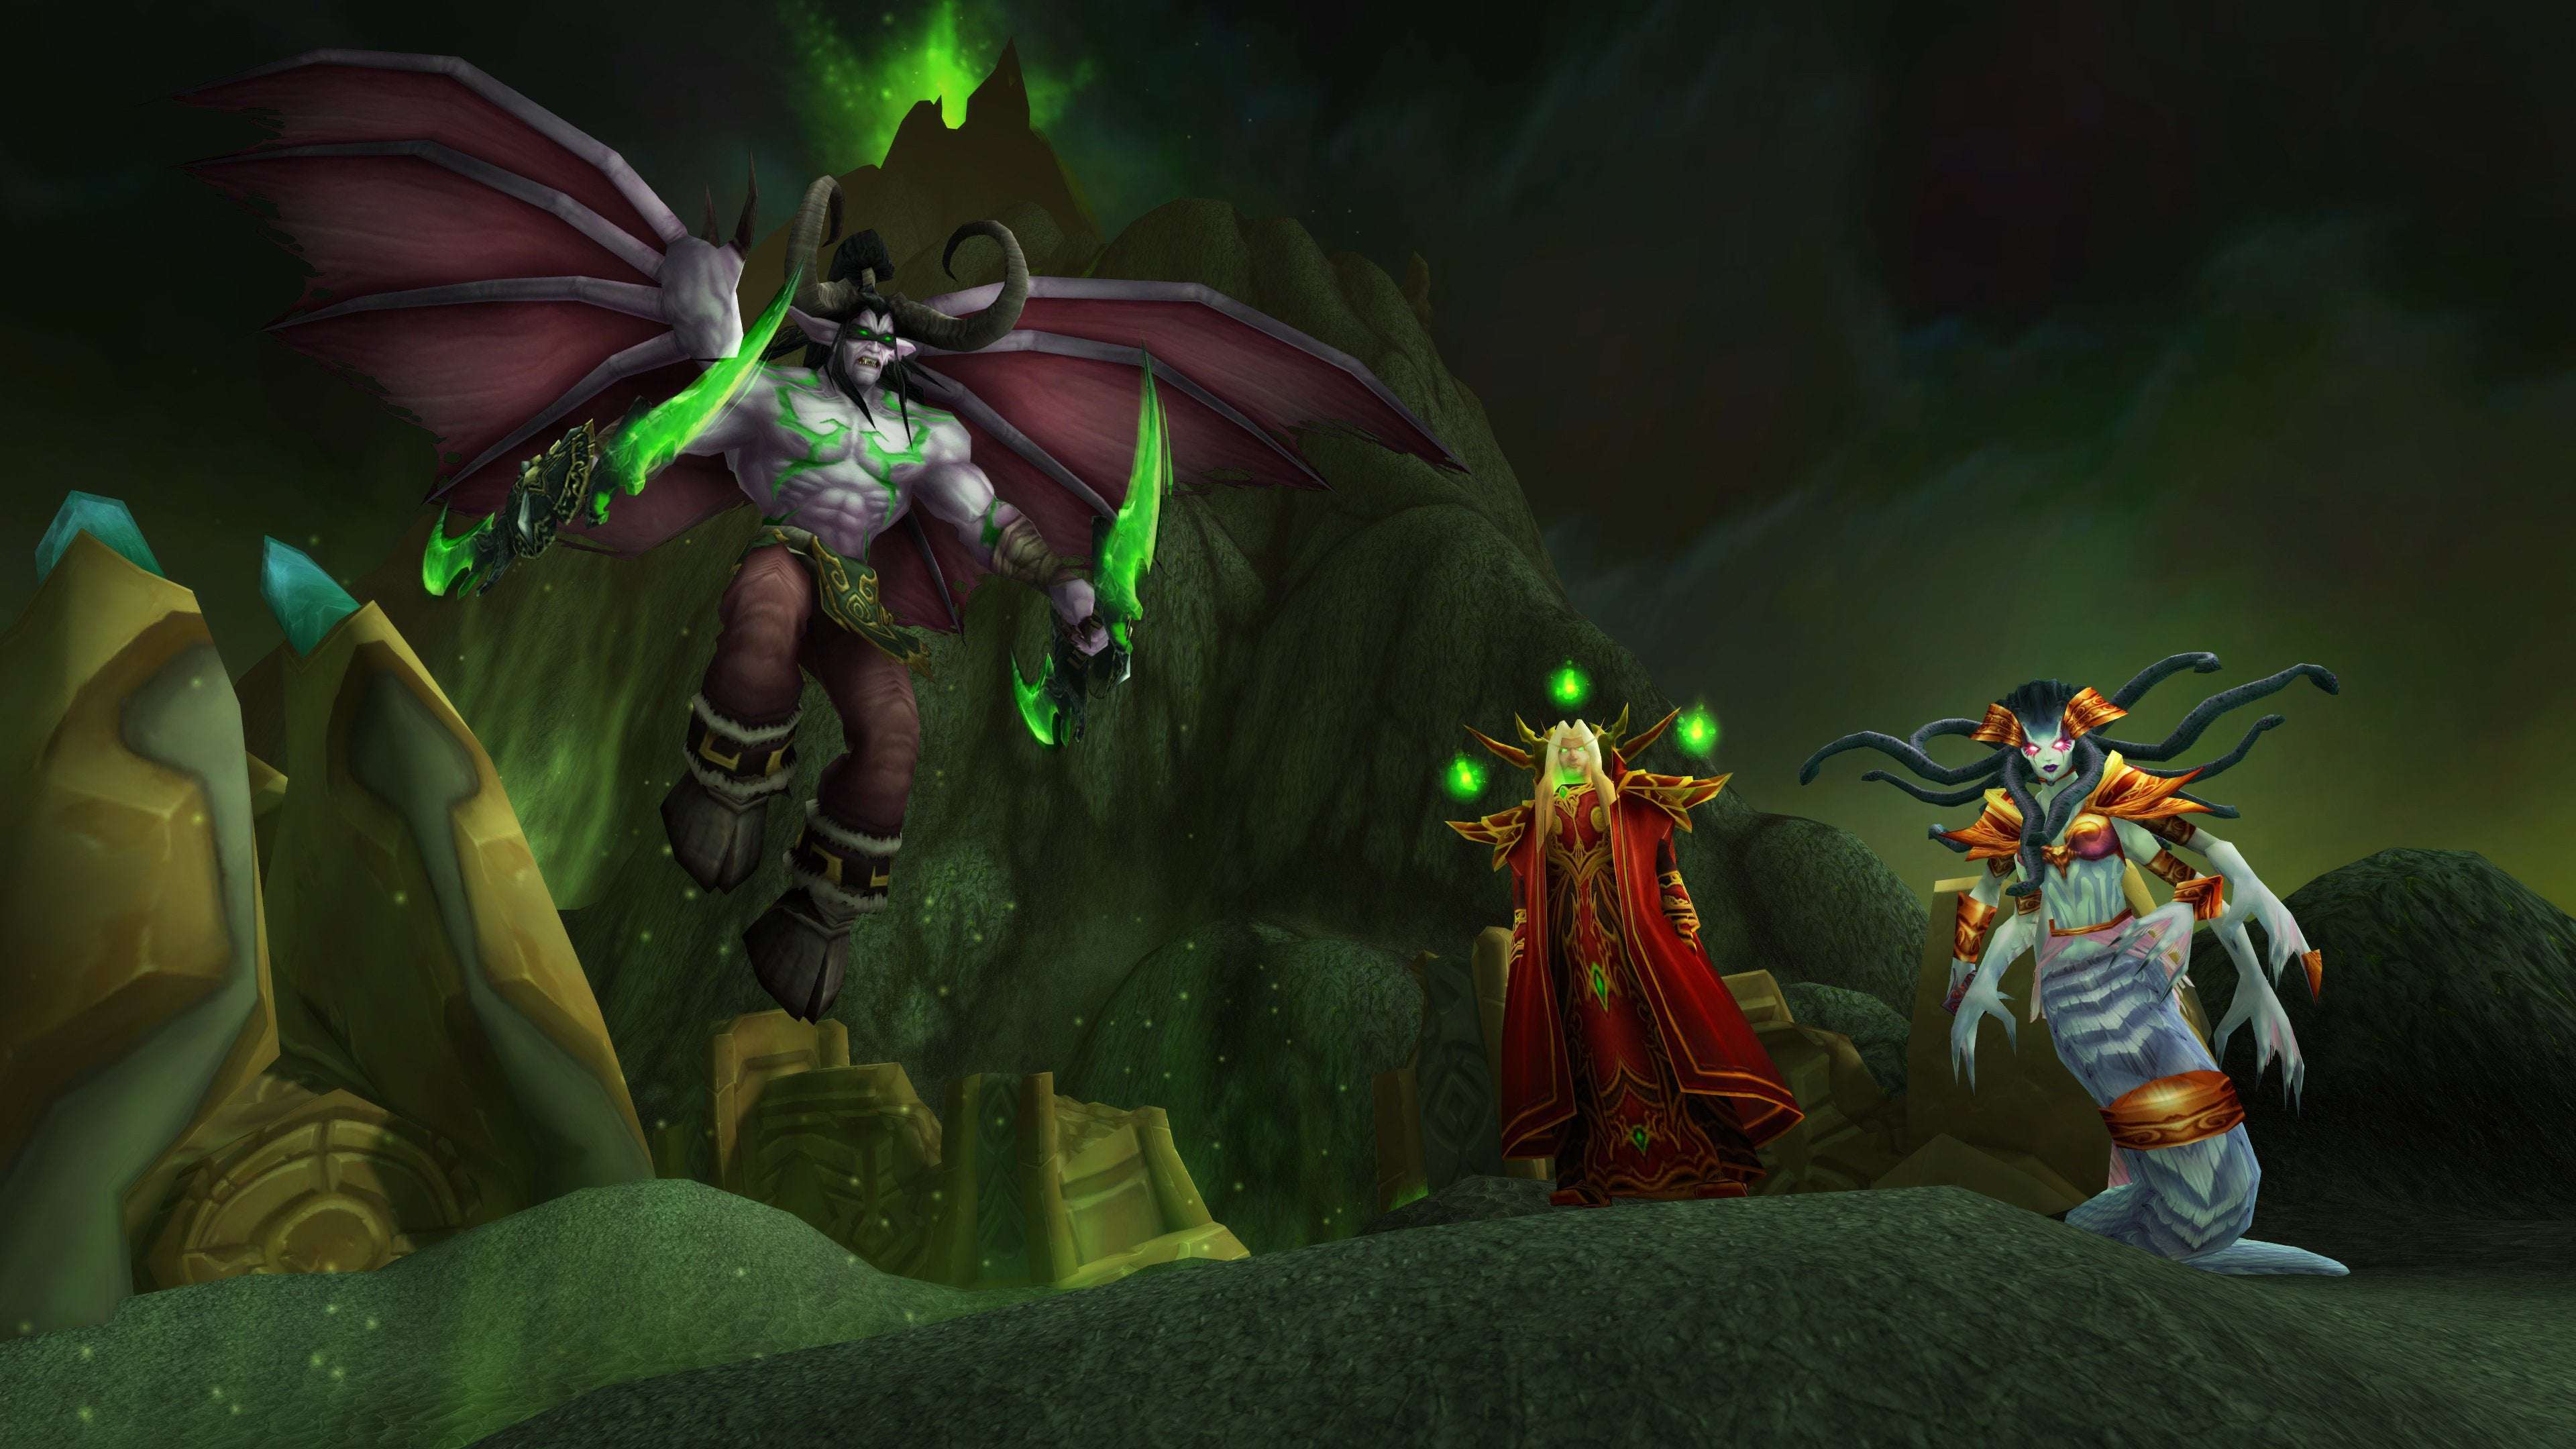 image for Burning Crusade Classic Global Release on June 1st, Pre-Patch May 18th